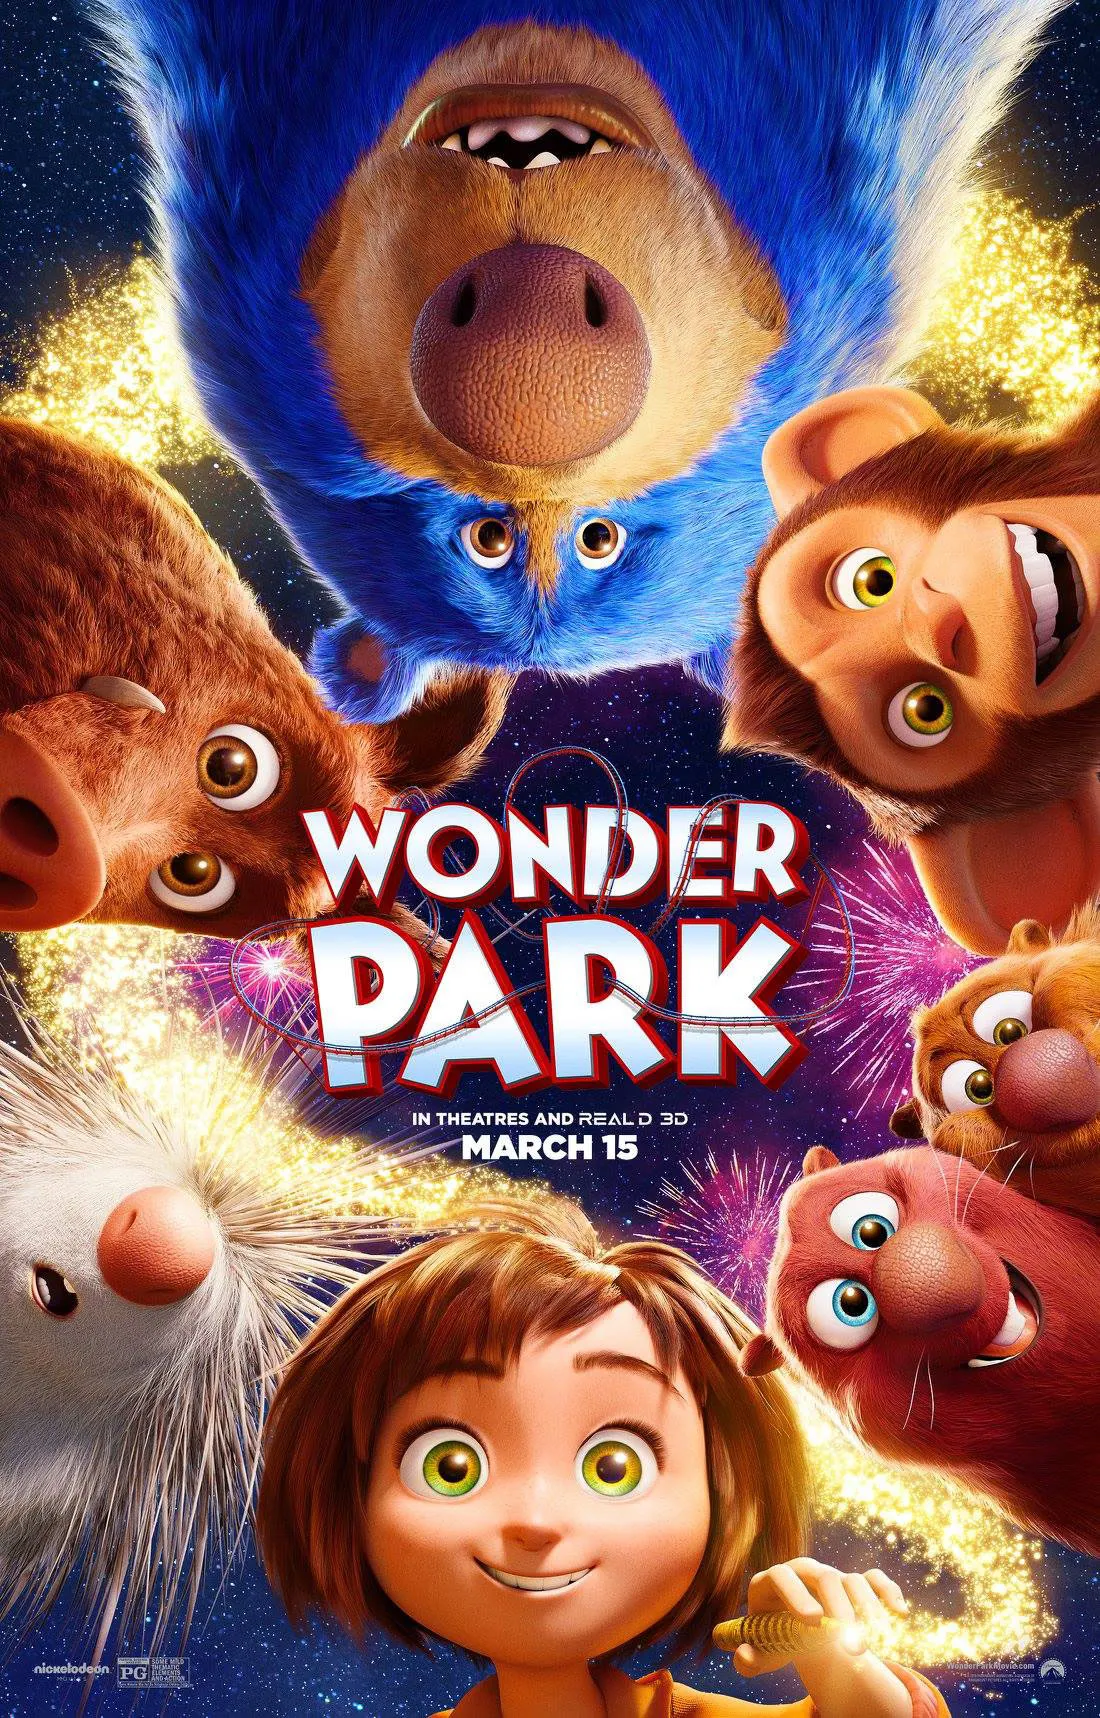 Wonder Park Movie Poster with main characters 